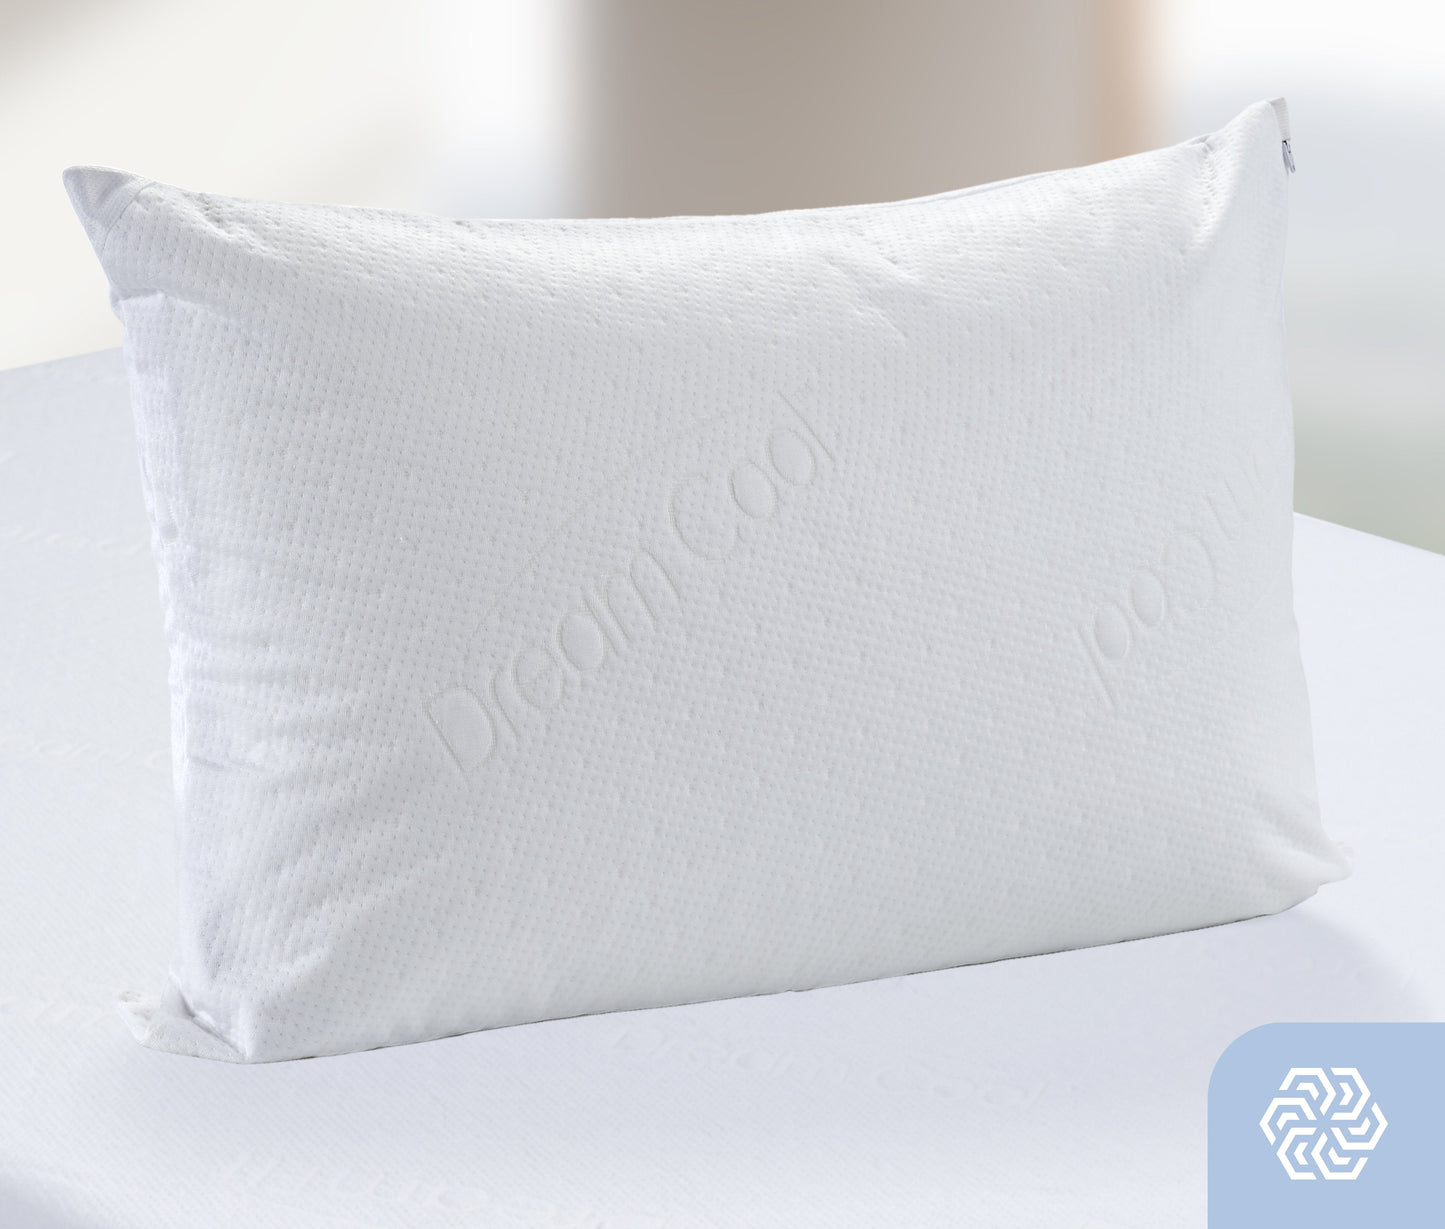 Waterproof Pillow Protector, DreamCool™ Collection